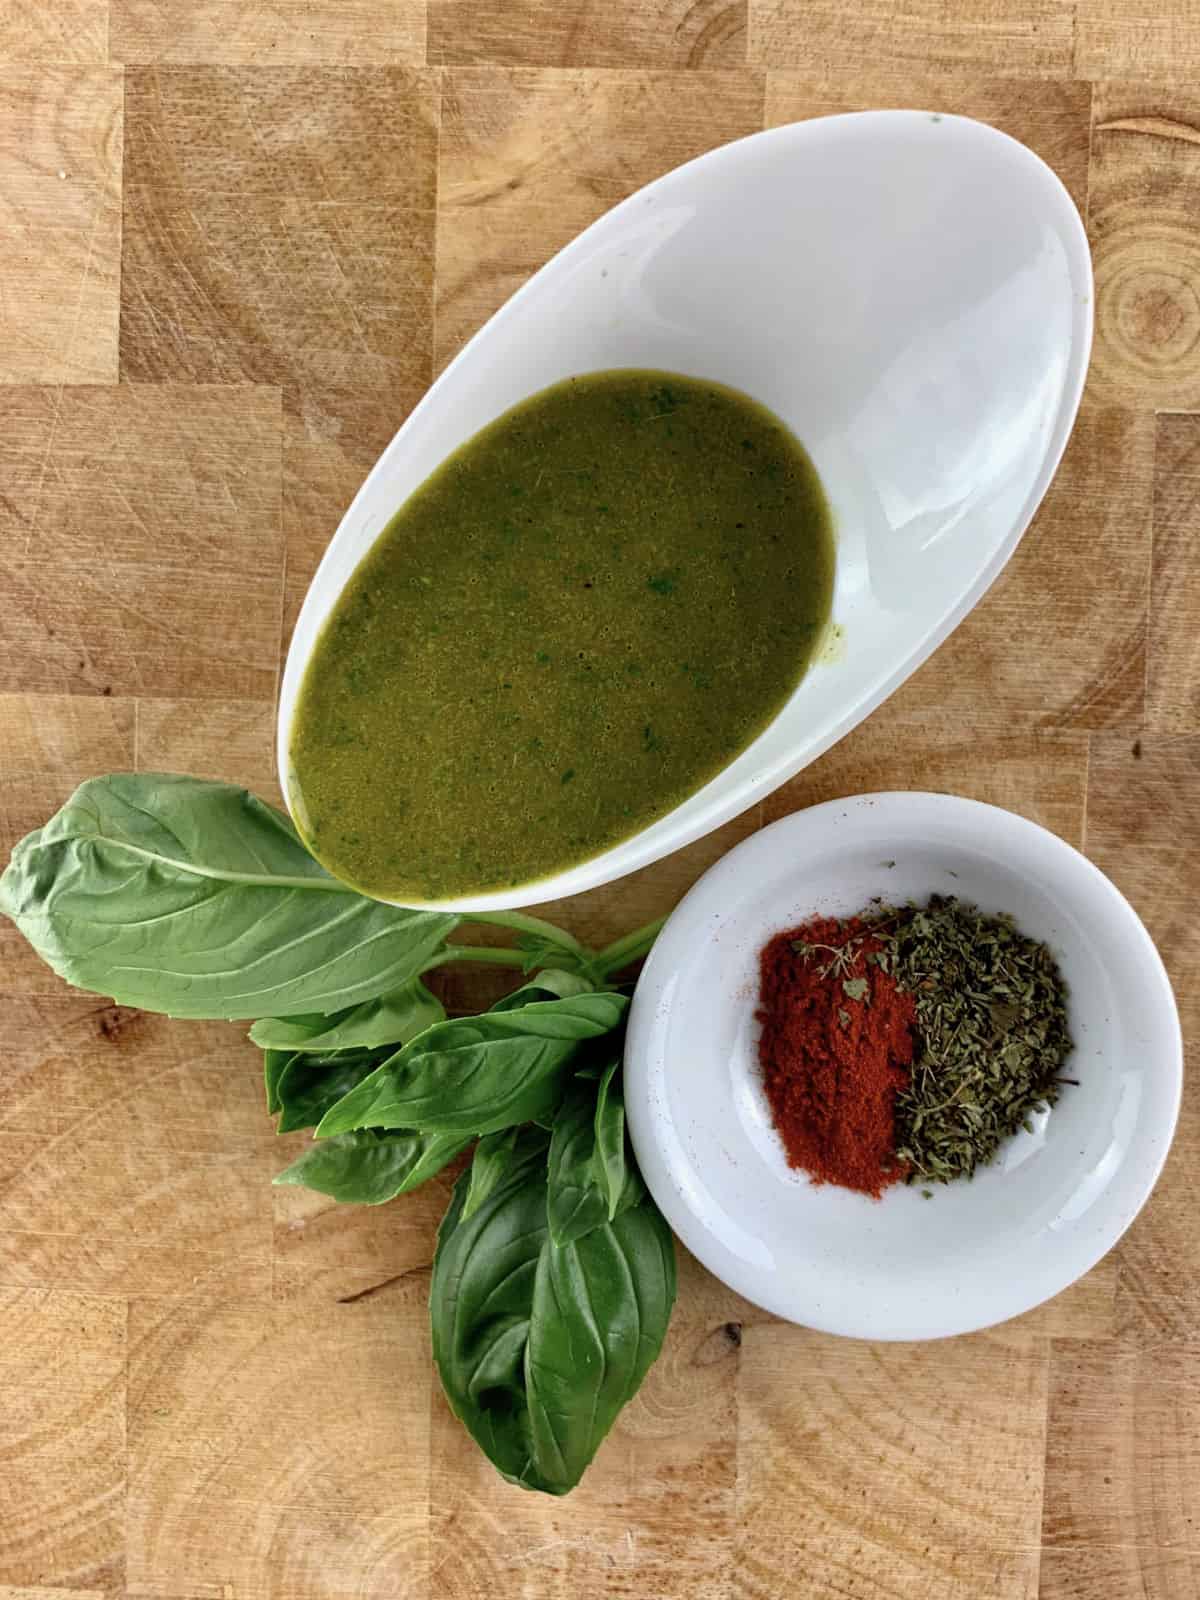 ITALIAN VINAIGRETTE IN A WHITE BOWL WITH FRESH BASIL AND PAPRIKA AND DRIED OREGANO IN A WHITE BOWL ON THE SIDE